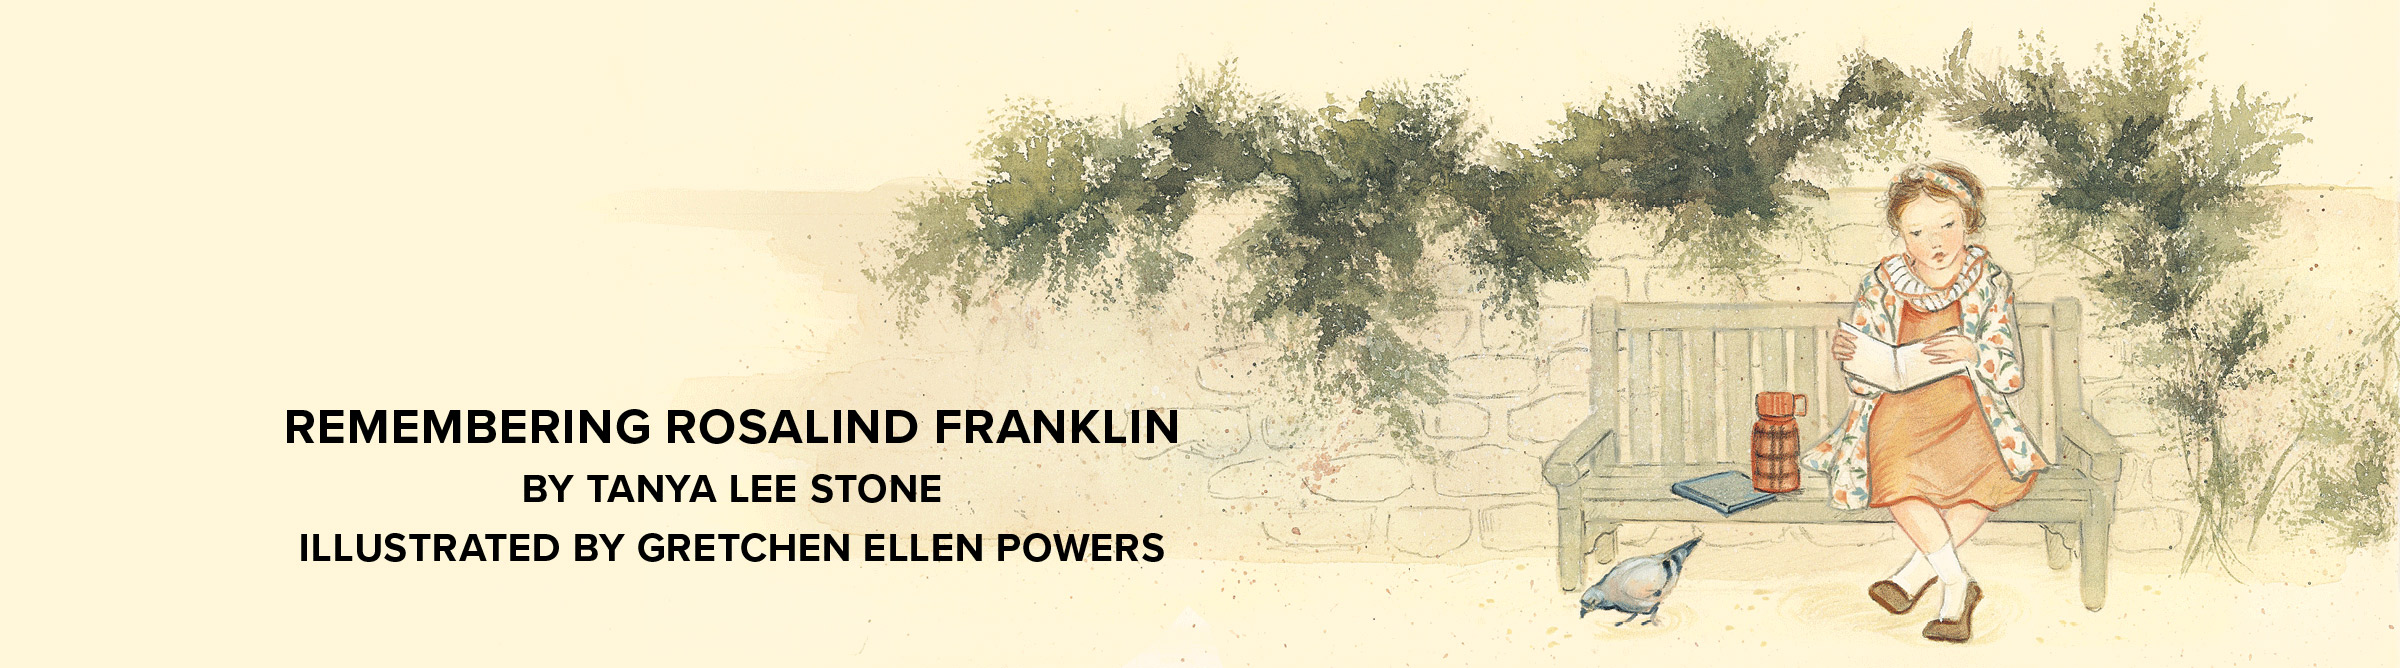 Graphic banner featuring 'Remembering Rosalind Franklin' by Tanya Lee Stone and illustrated by Gretchen Ellen Powers